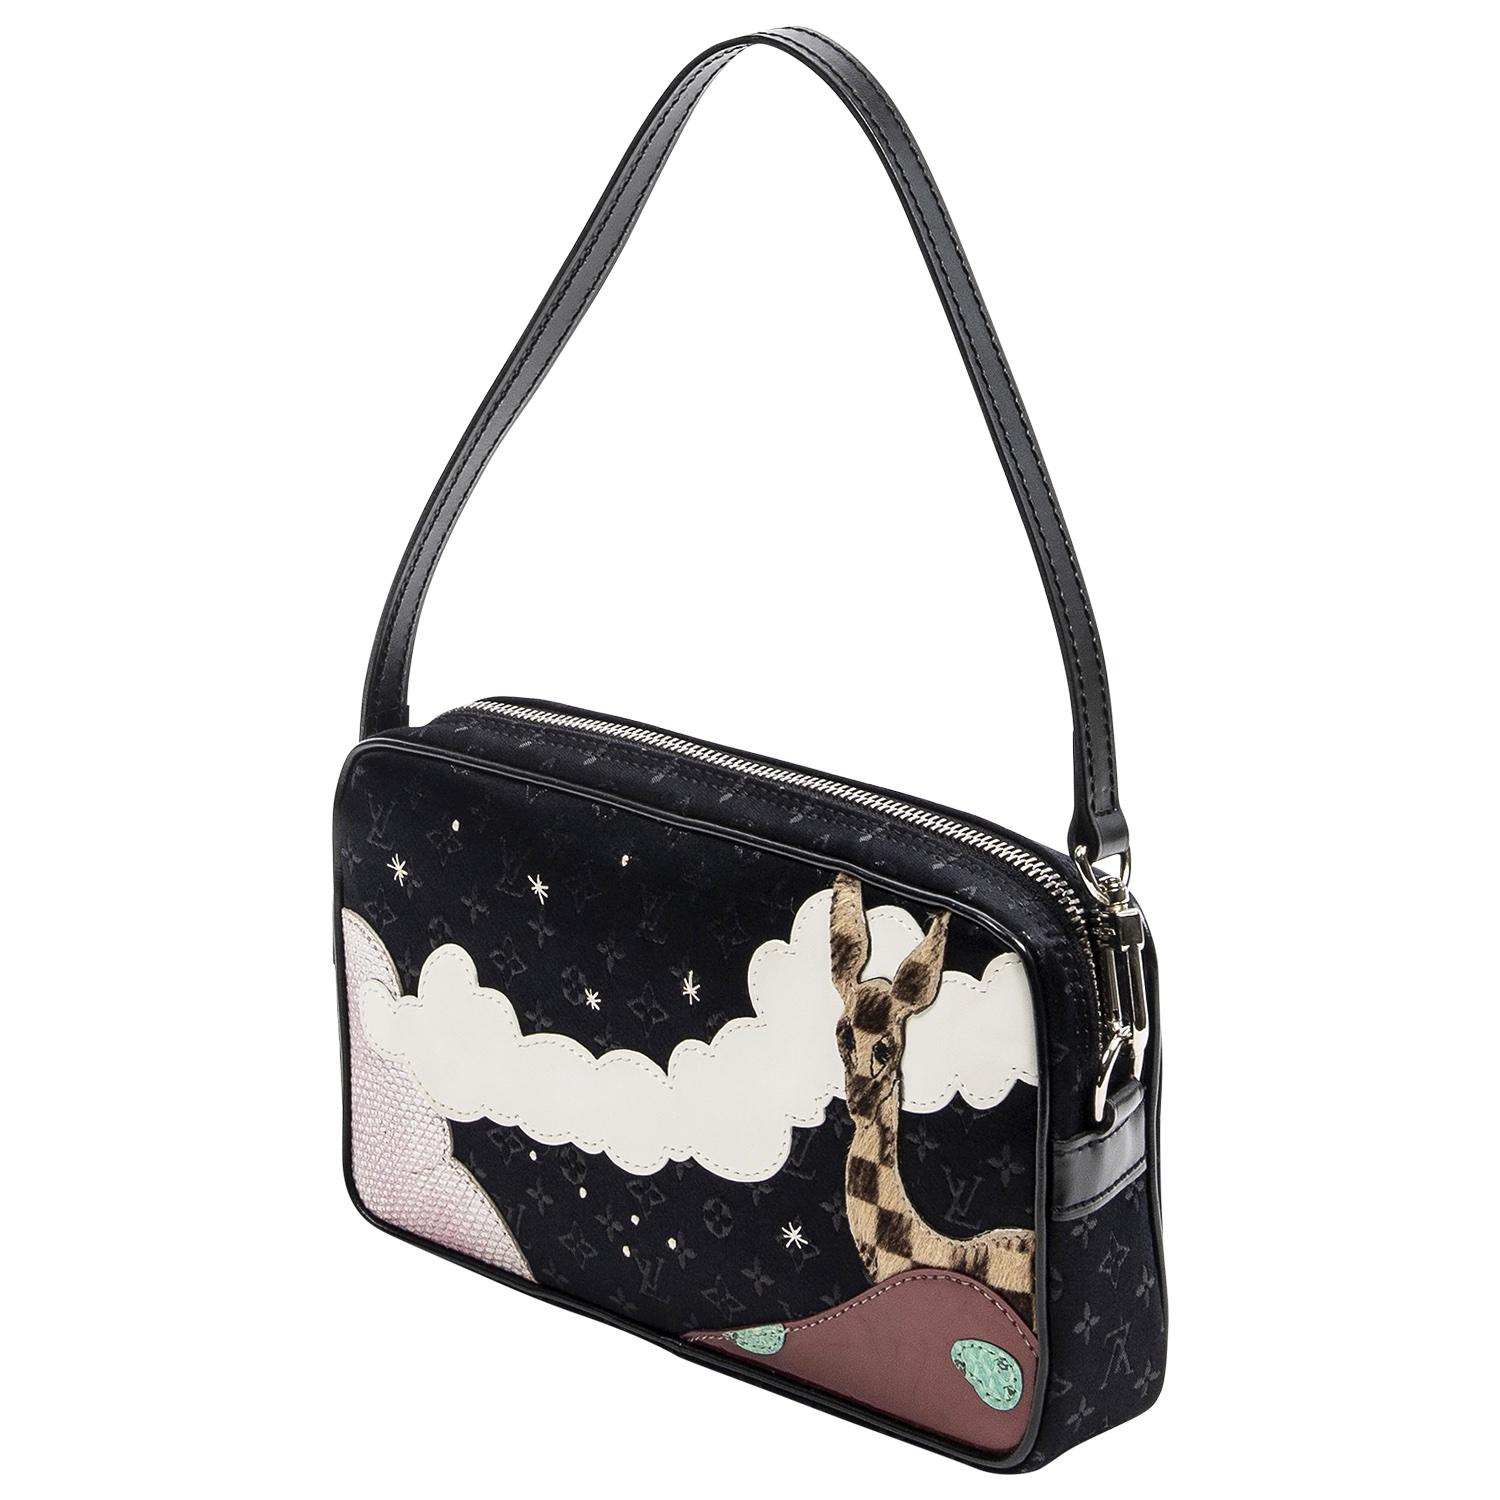 NEVER CARRIED and from the 2002 Collection! This LV by Marc Jacobs piece is detailed in black LV monogram satin, pony hair with lizard and patent leather trim, silver-tone brass hardware, leather trim embellishment, and a single should strap. The